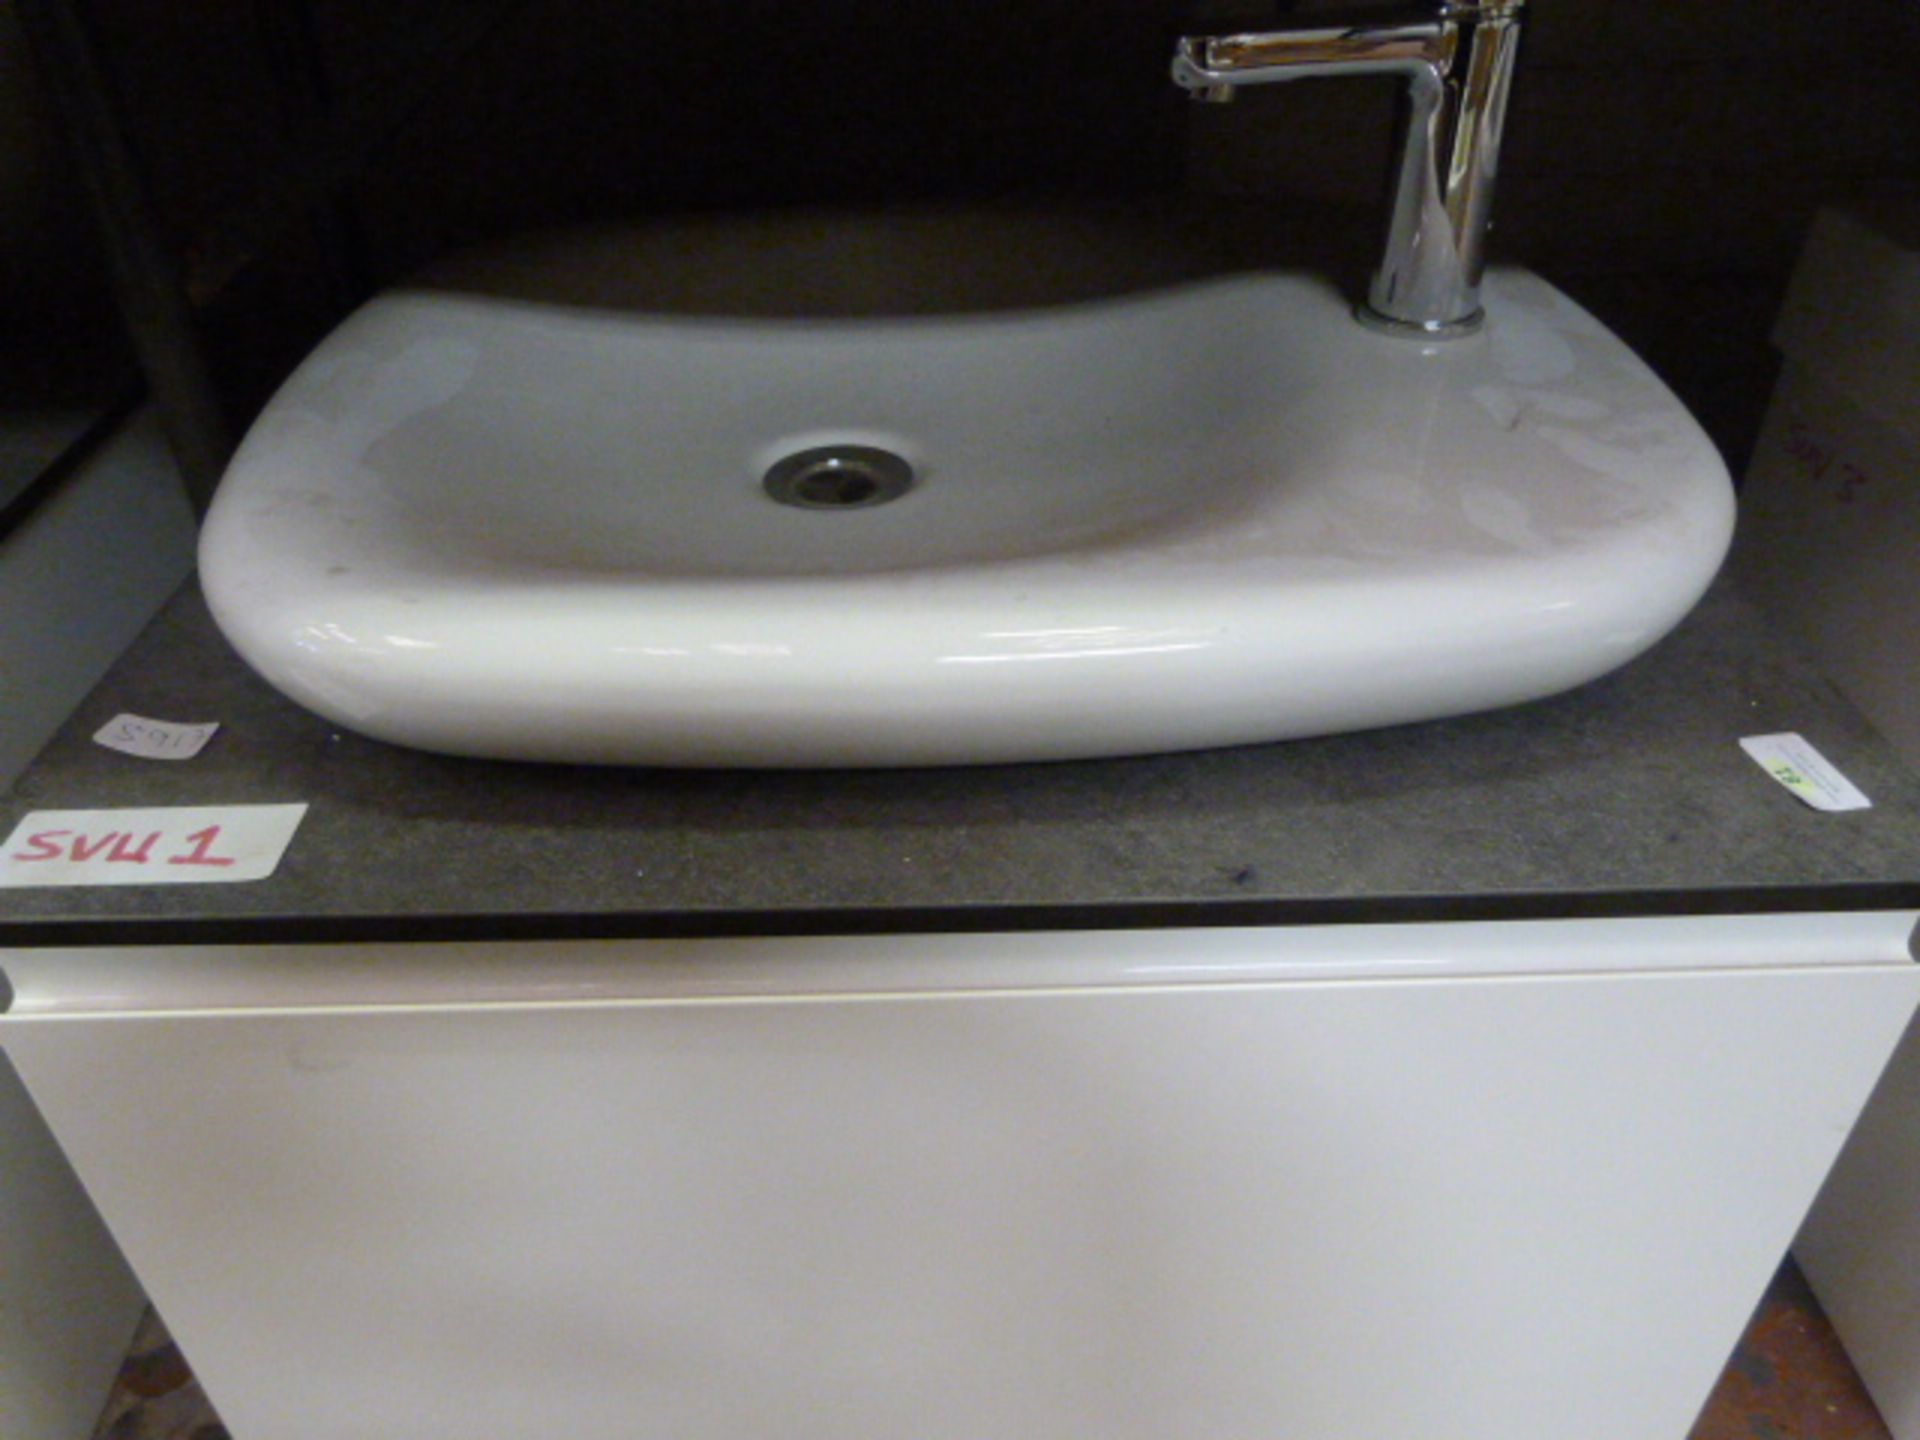 *Contemporary Sink Unit with Chrome Tap